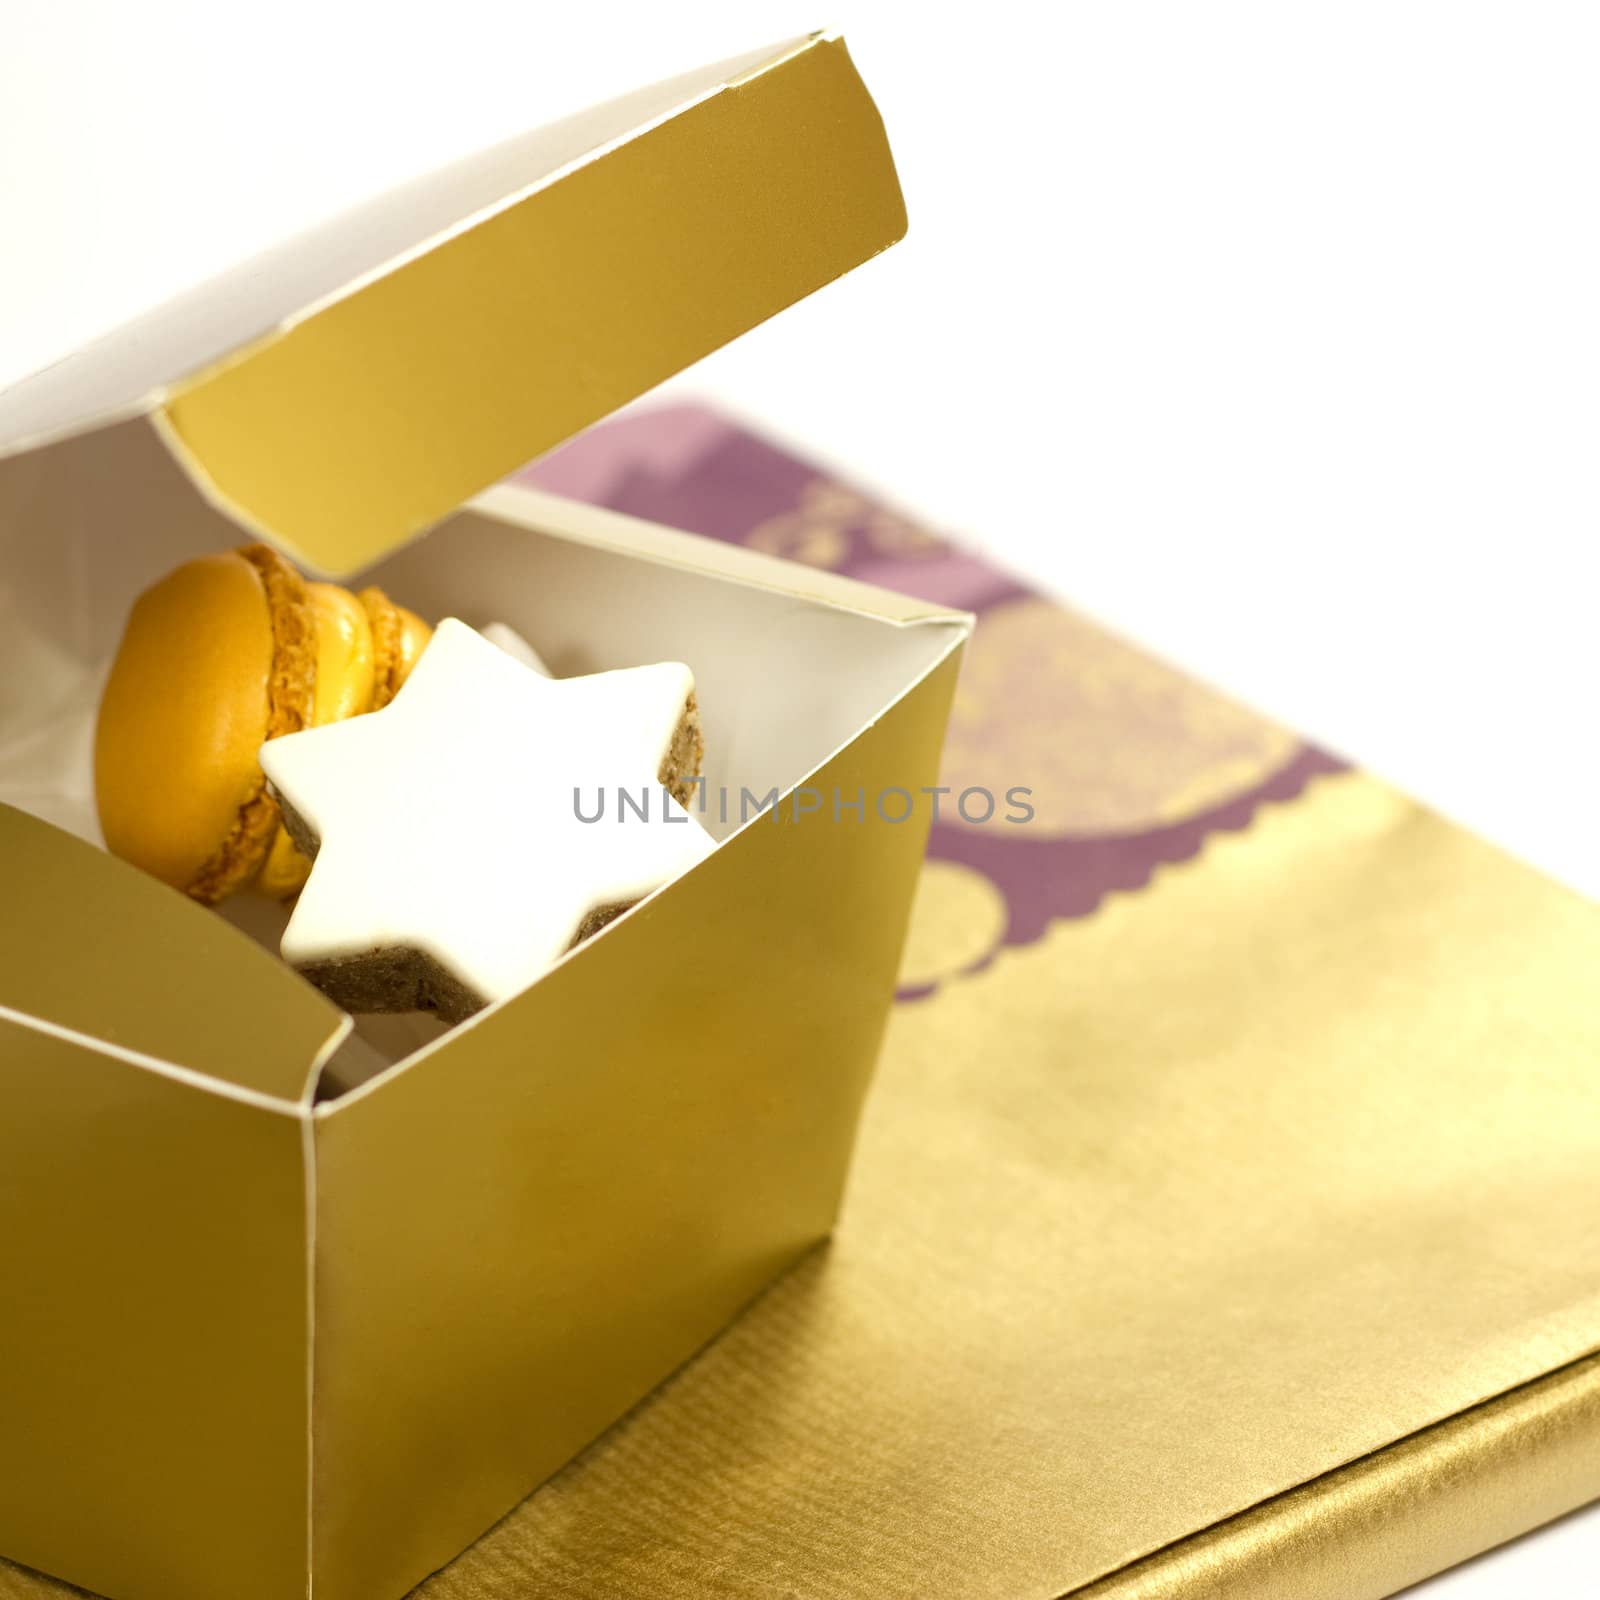 Cookies in a present box on a white background by Kristina_Usoltseva